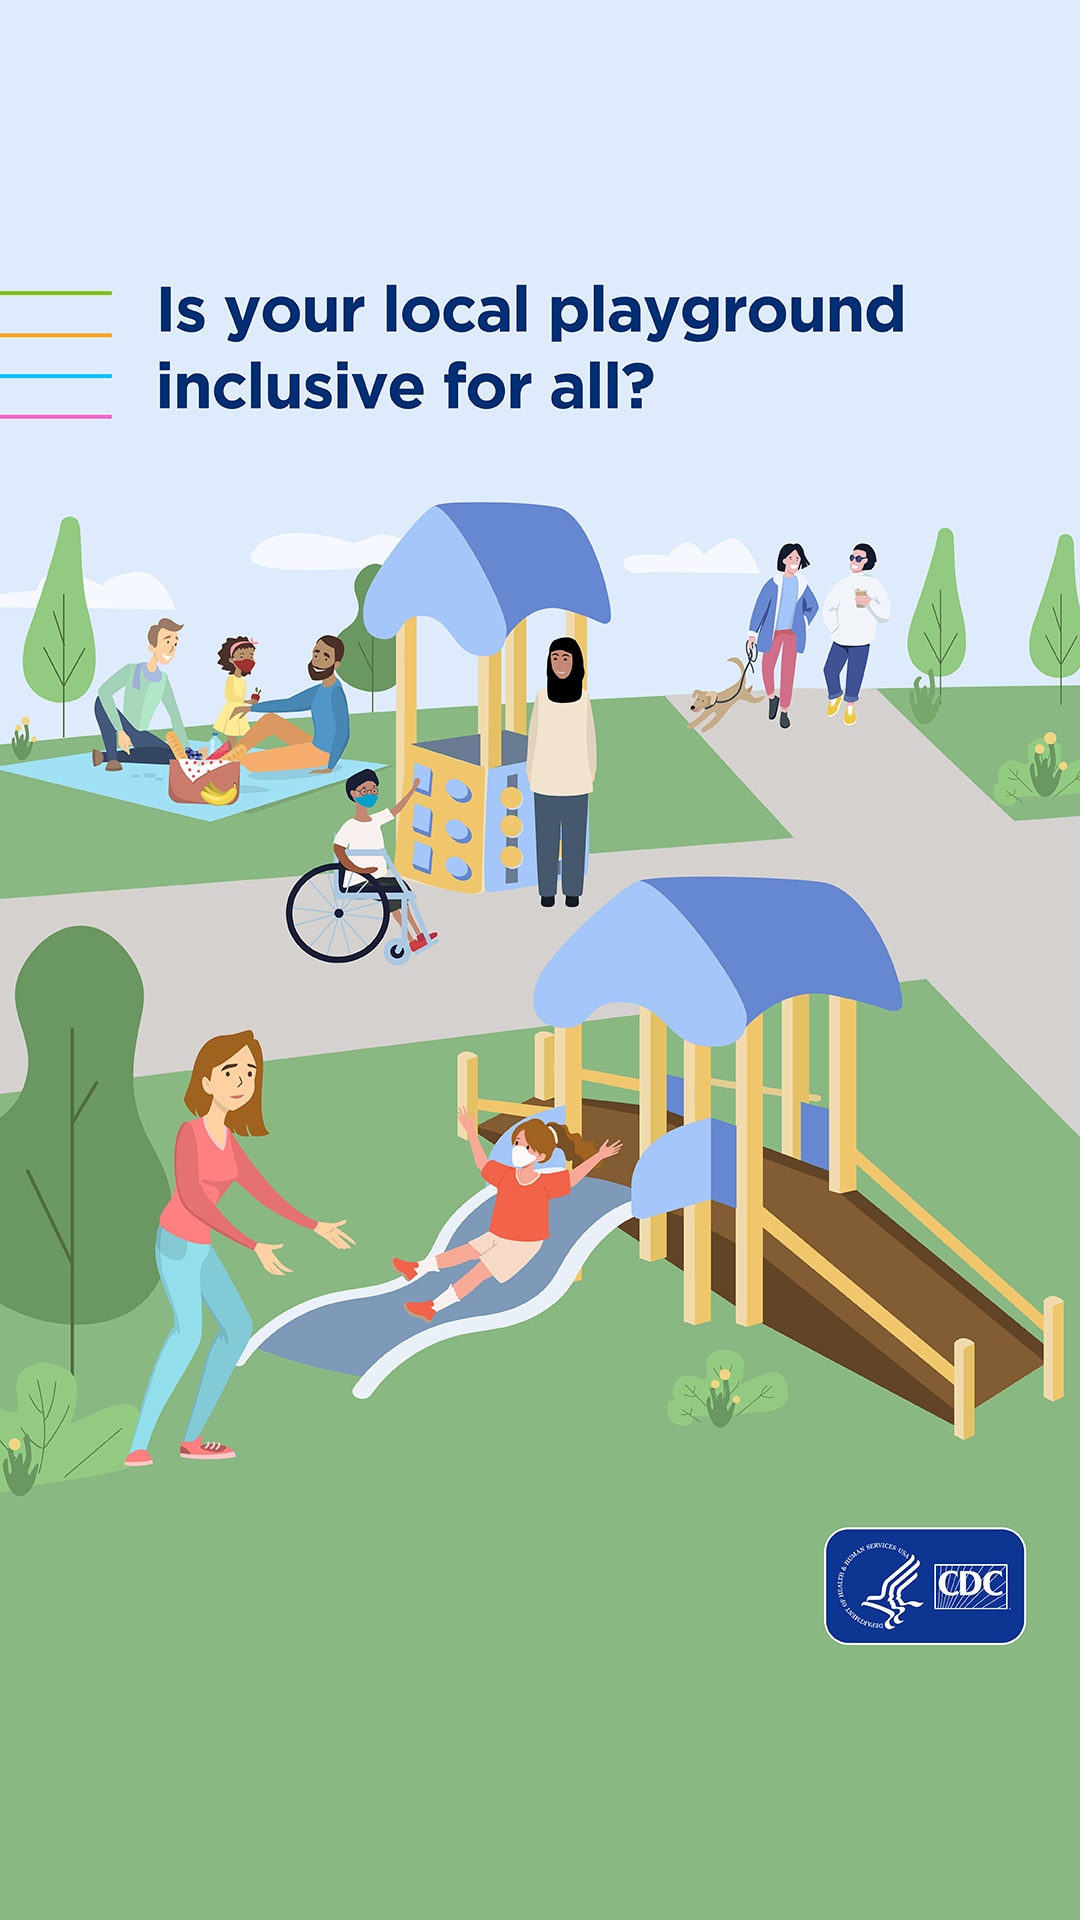 Illustration of a playground with various equipment that is accessible for all, and several people and children enjoying the space. The graphic shows two dads having a picnic with their daughter, a boy in a wheelchair playing at a sensory station, two women walking a dog, and a mother catching her child coming down the slide.  CDC logo